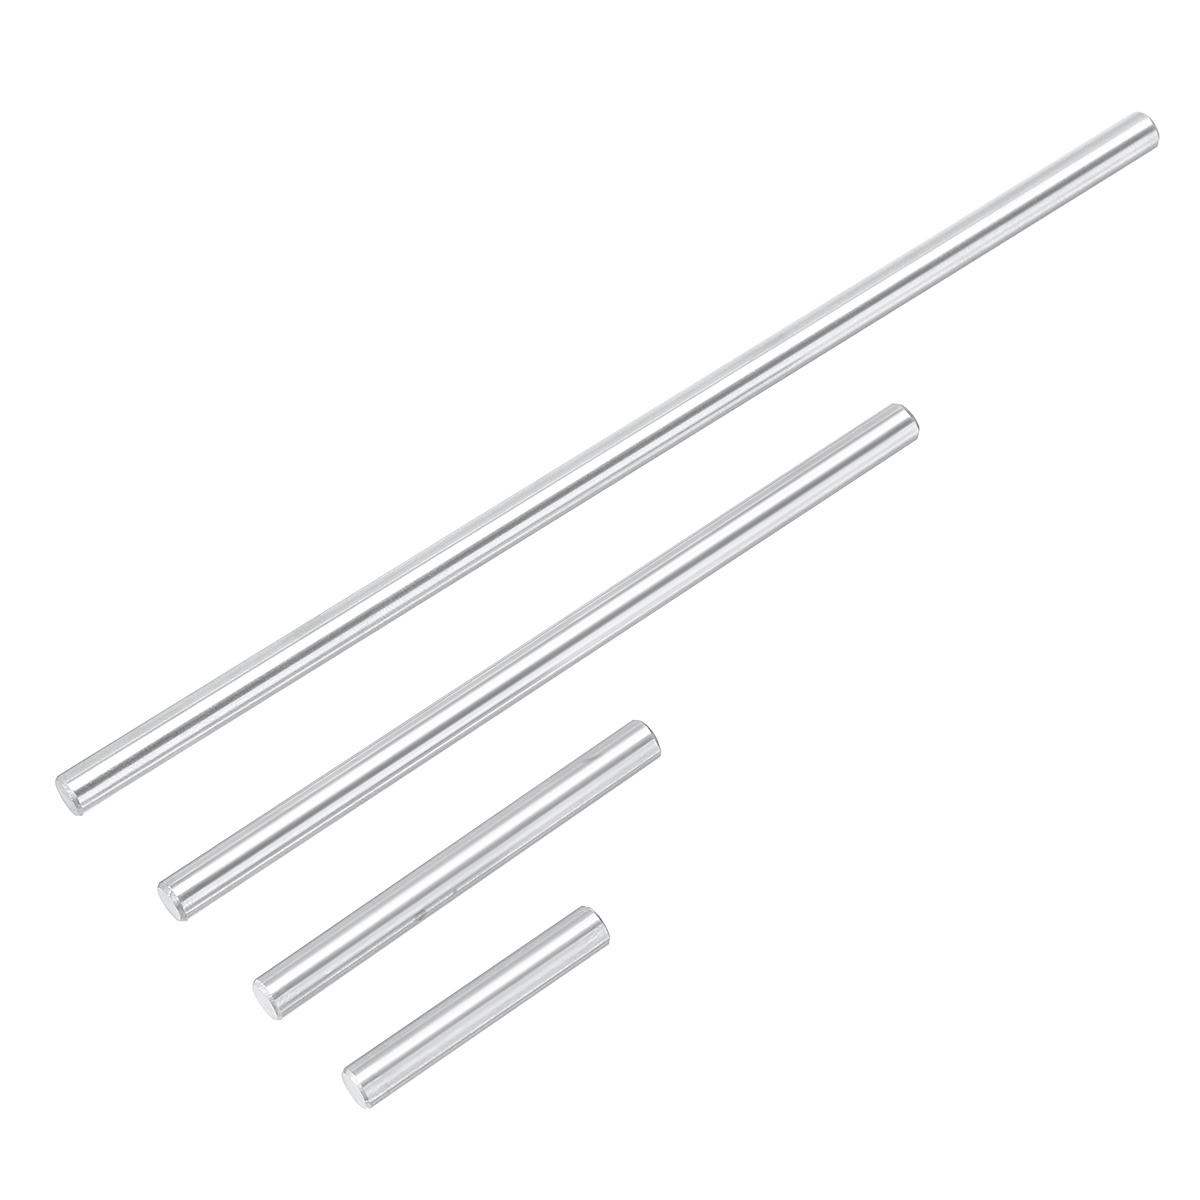 10pcs-52mm-Ejector-Pins-Set-32-152cm-Push-Rifling-Button-Ejector-Pins-for-Machine-Reamer-1311536-5